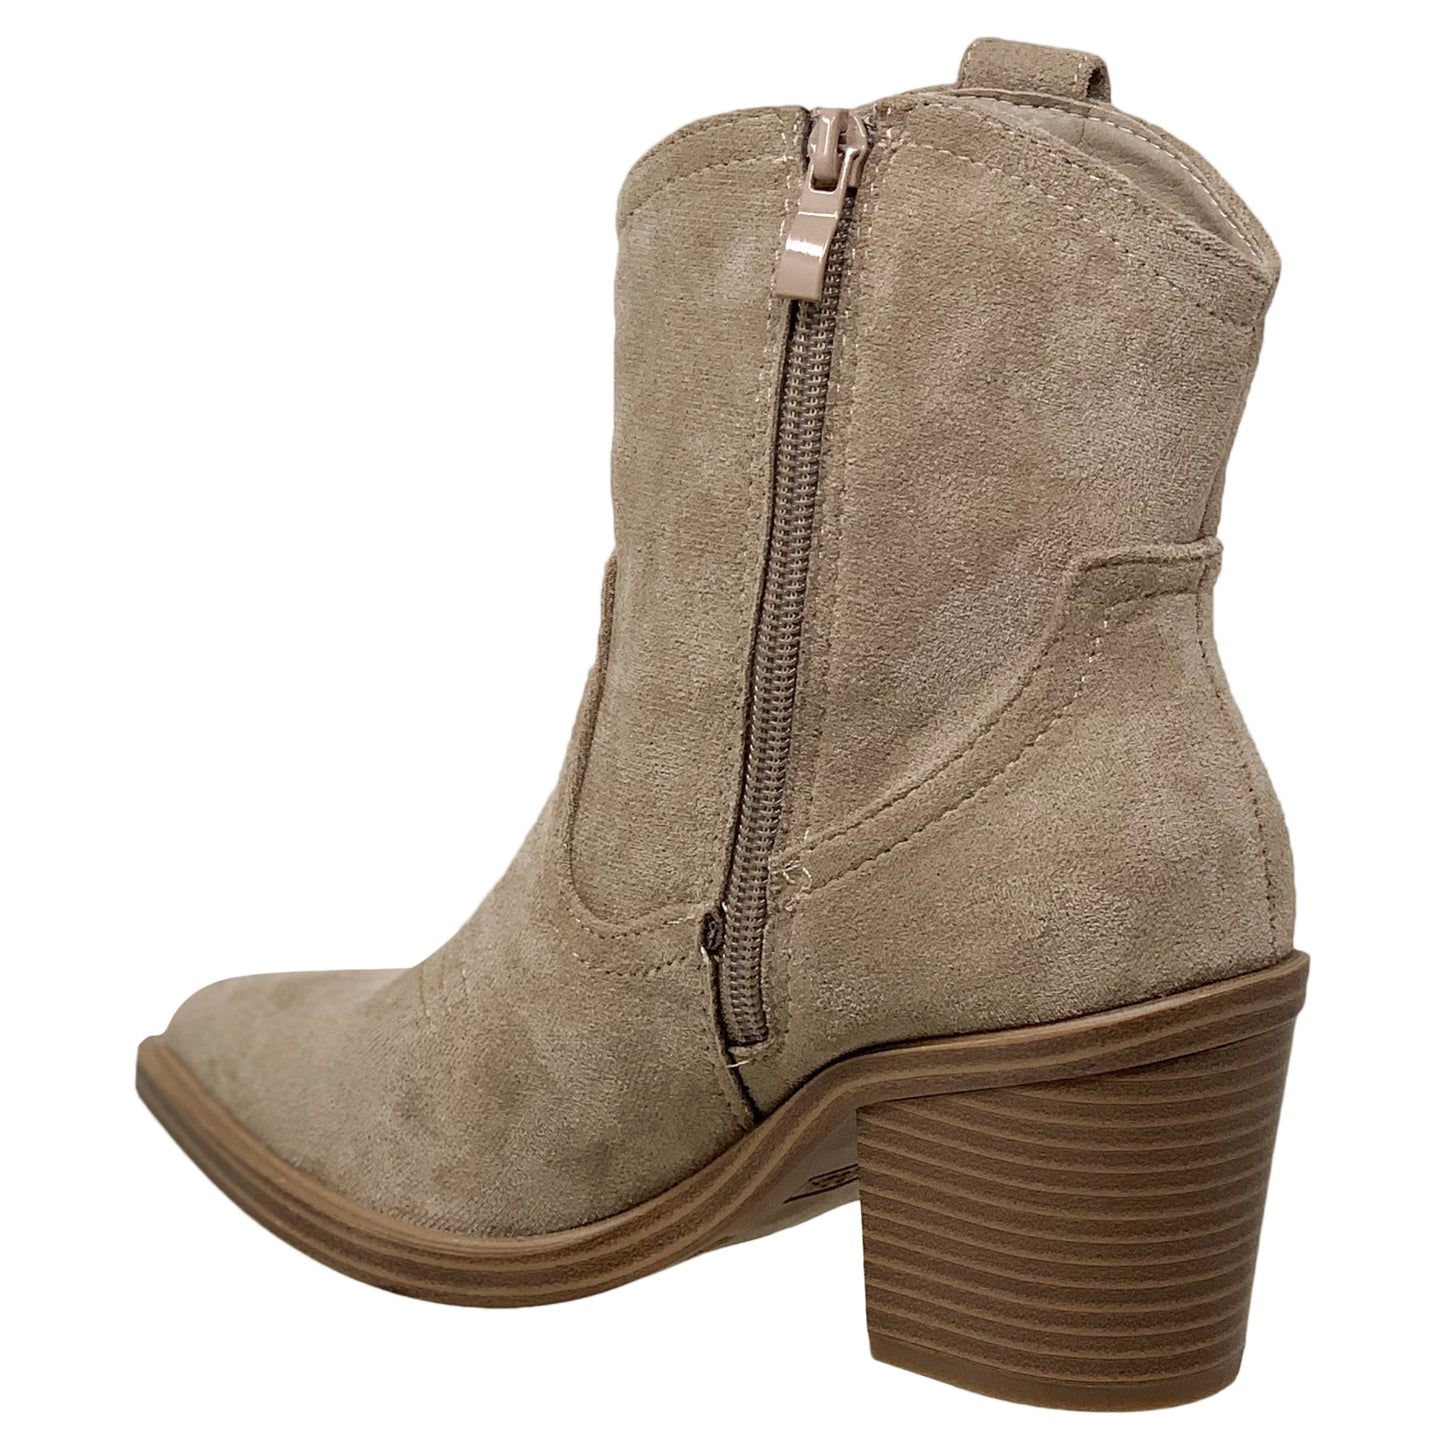 Western Ankle Booties Stitched Cowboy Toe Side Zipper Closure Taupe